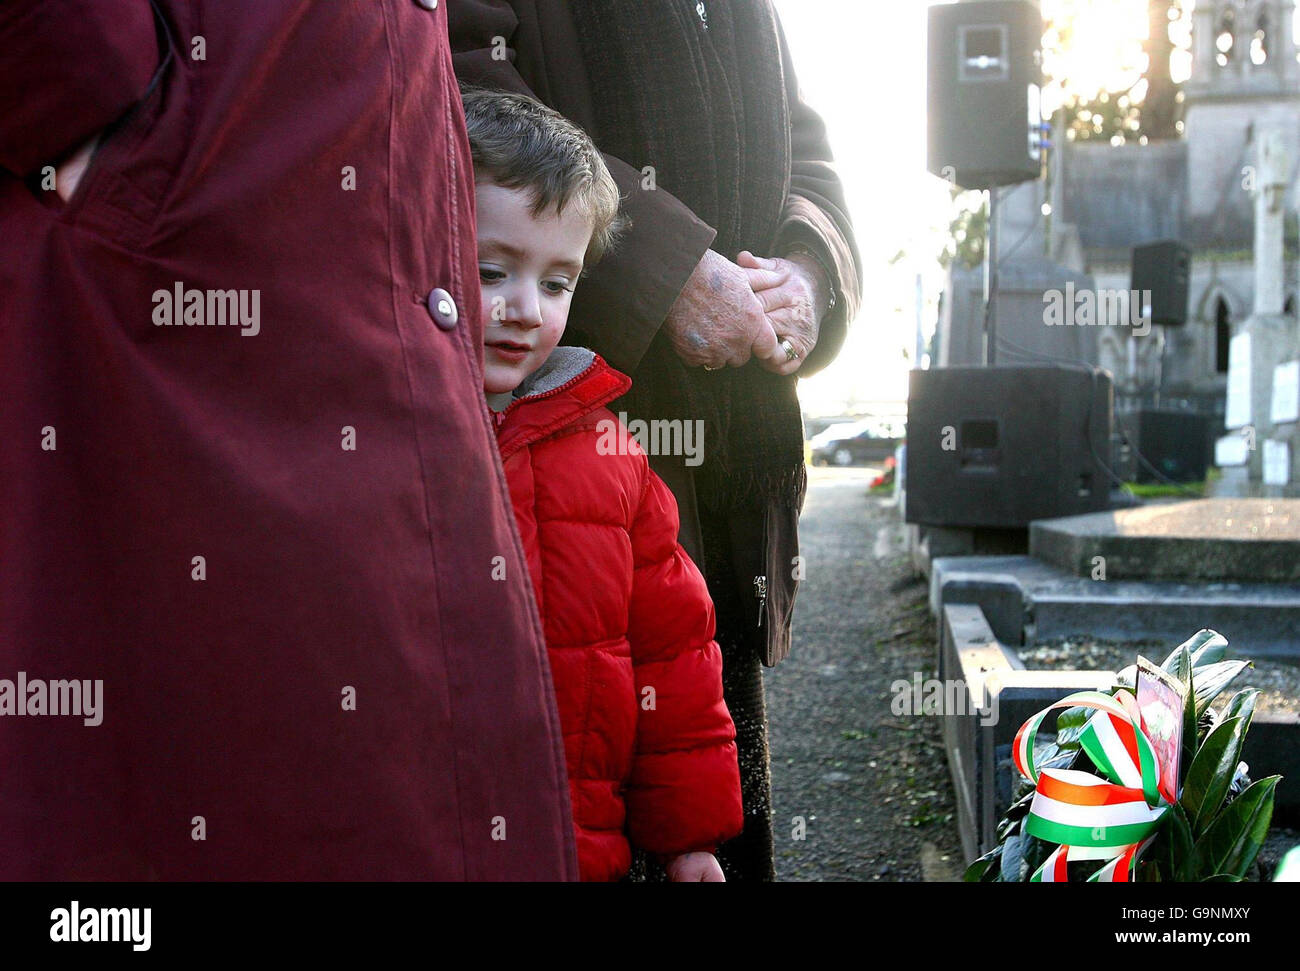 Three-year-old Cillian Cooney, great-great grandson of Jim Larkin at his graveside in Glasnevin Cemetery, Dublin, at an event marking the centenary of a dockers strike led by Larkin. PRESS ASSOCIATION Photo. Stock Photo